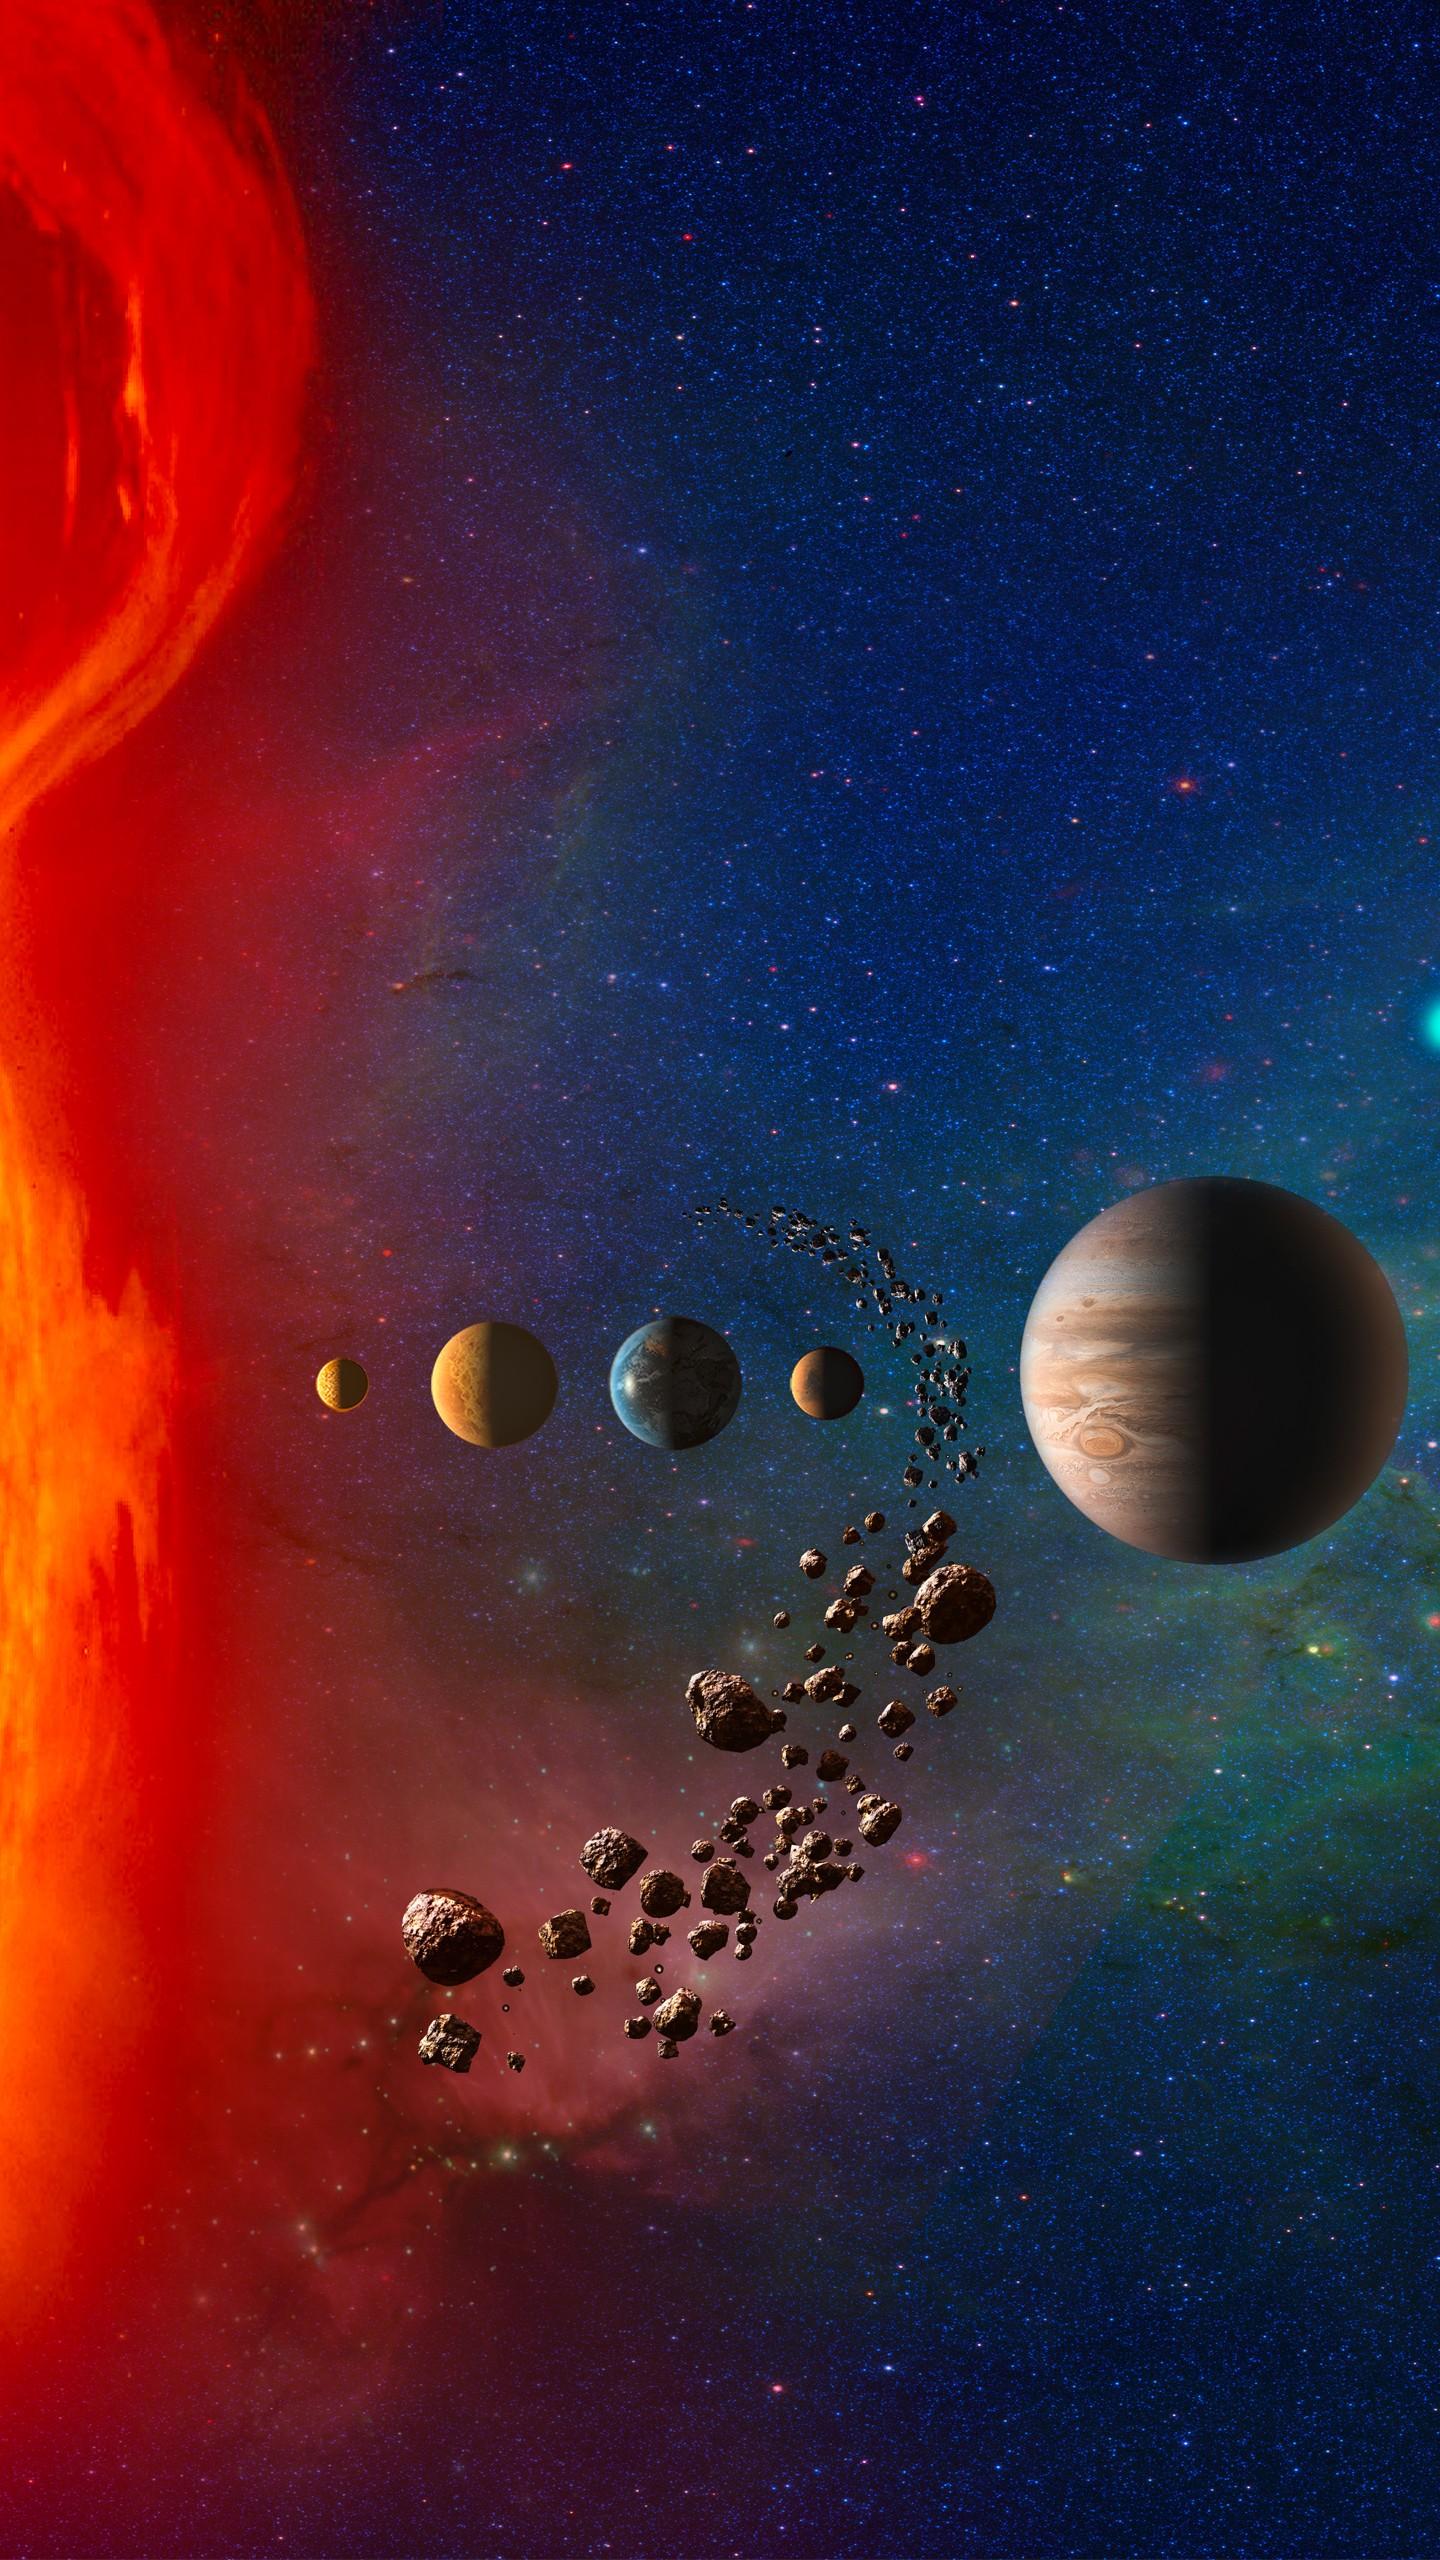 WALLPAPERS HD: Planets in Solar System